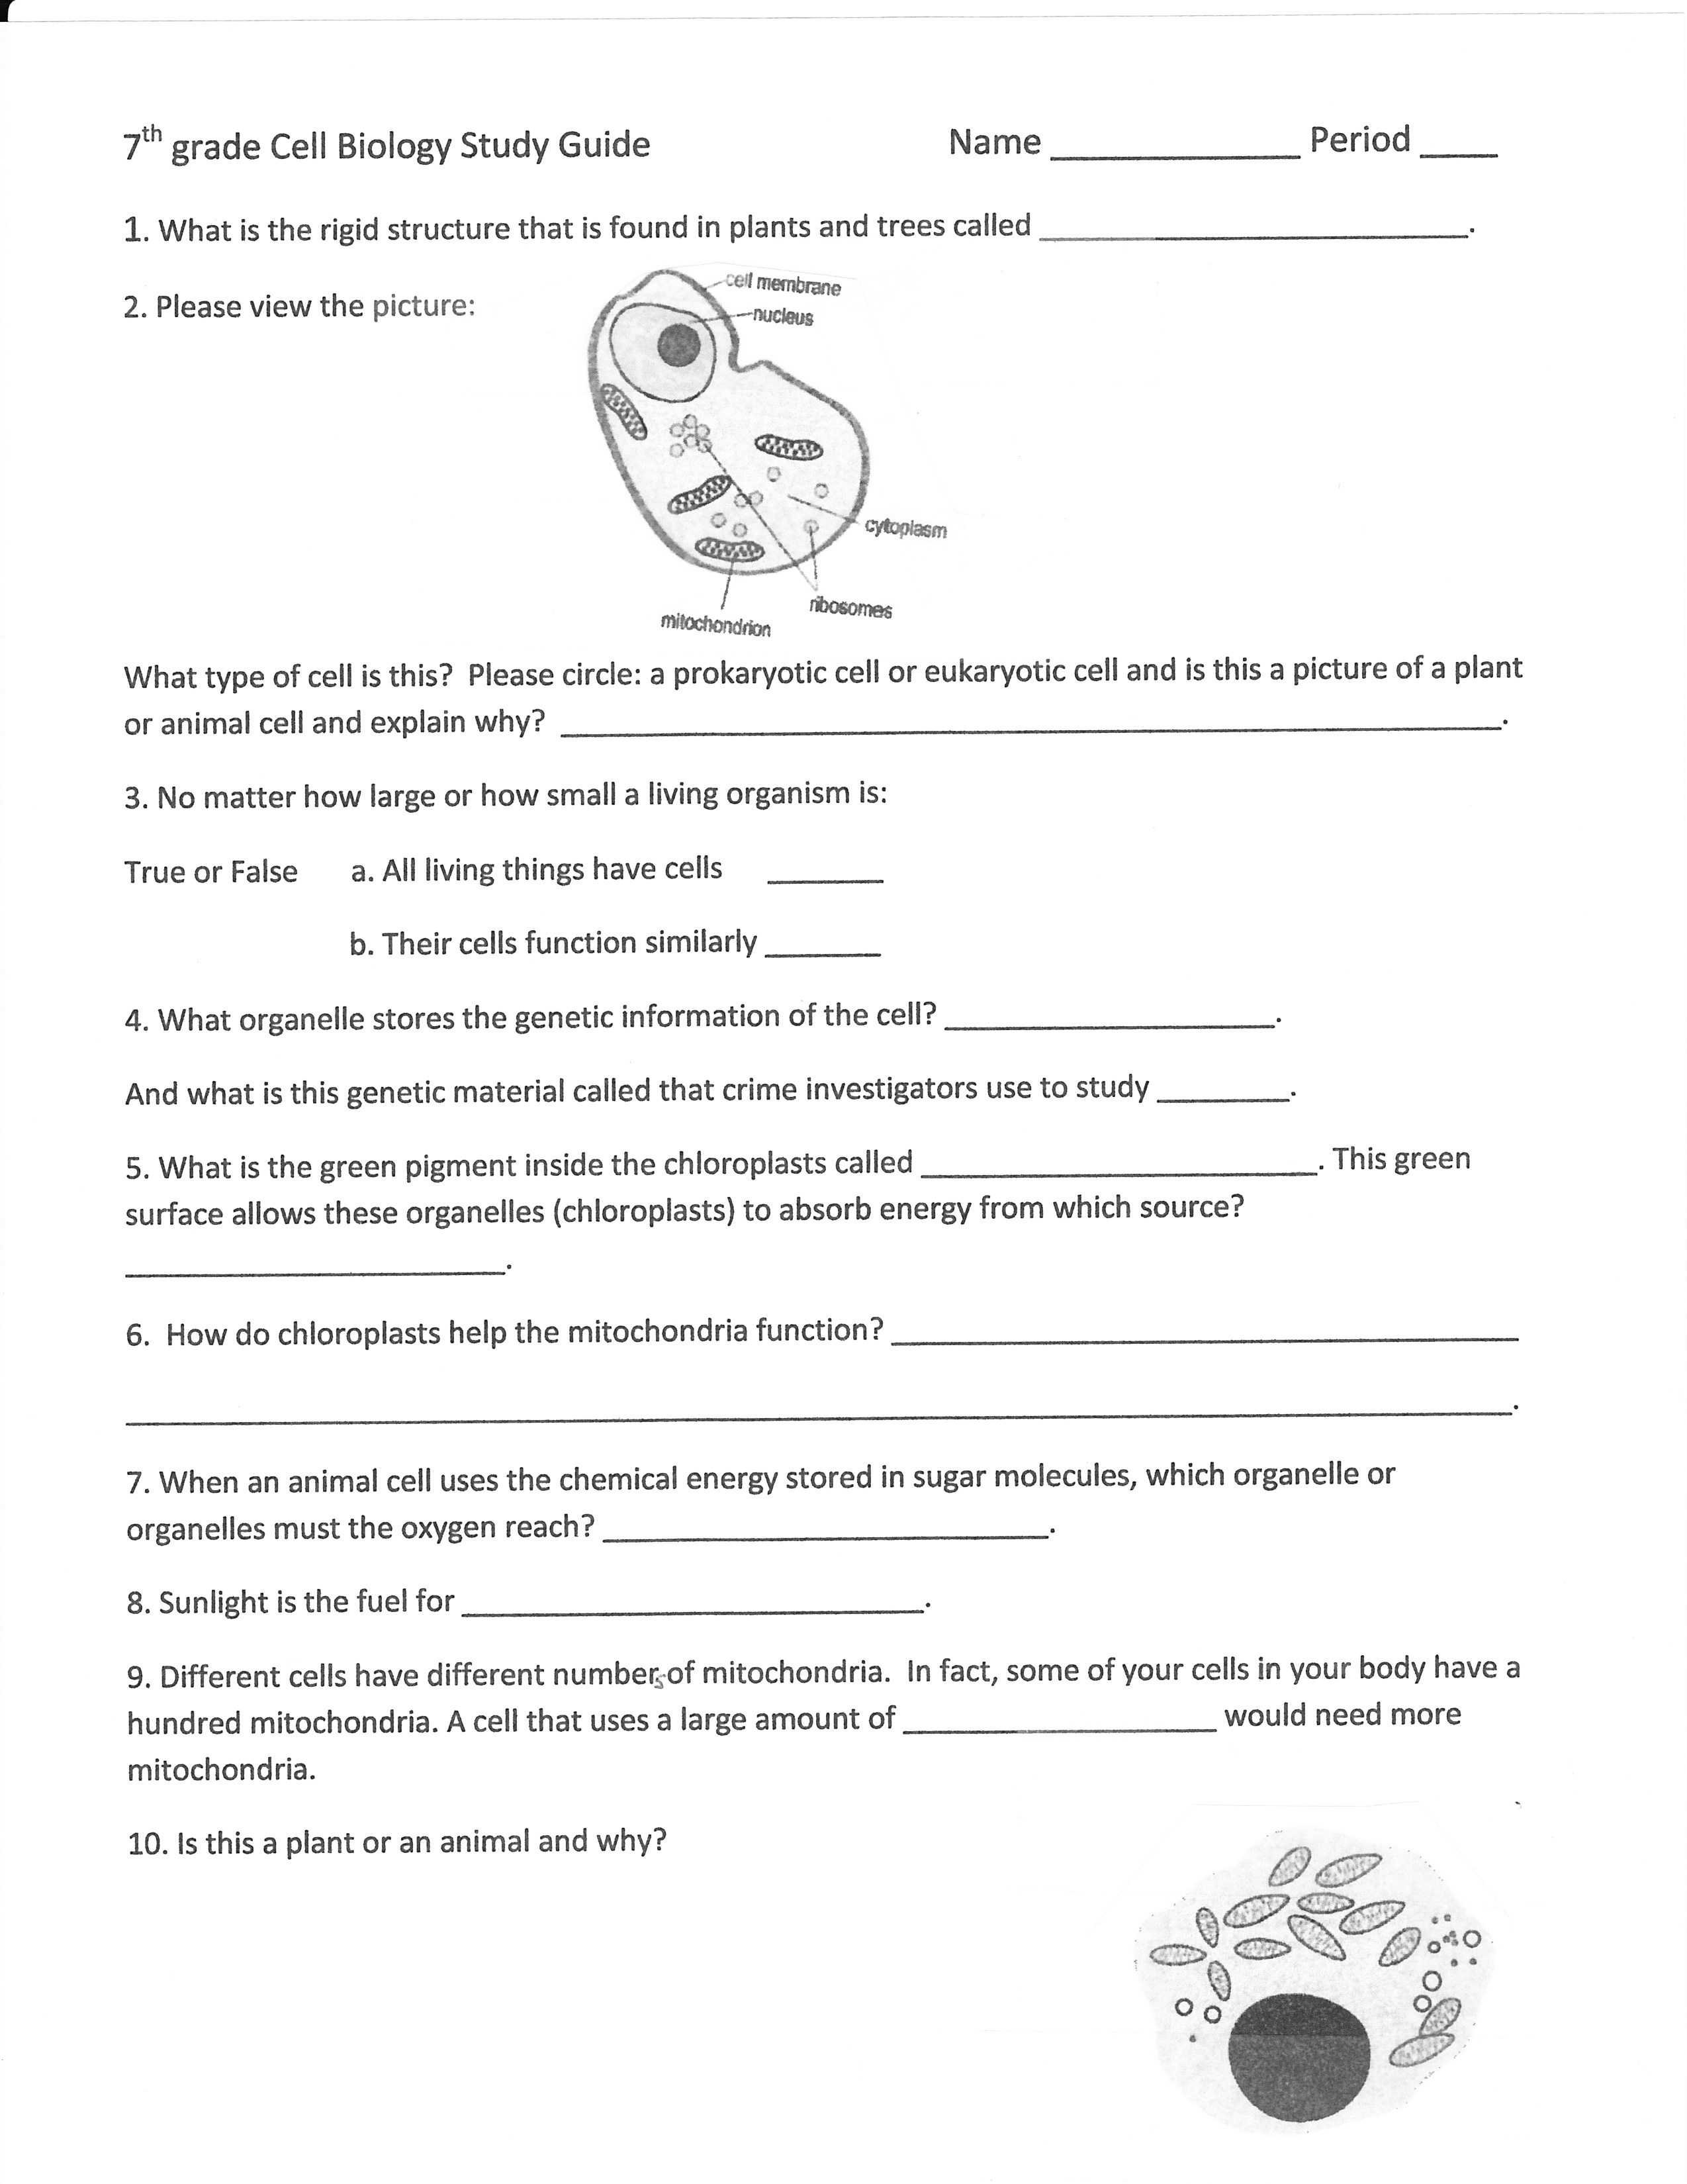 19 Best Images of Cells Worksheets Grade 7 - Plant and Animal Cell